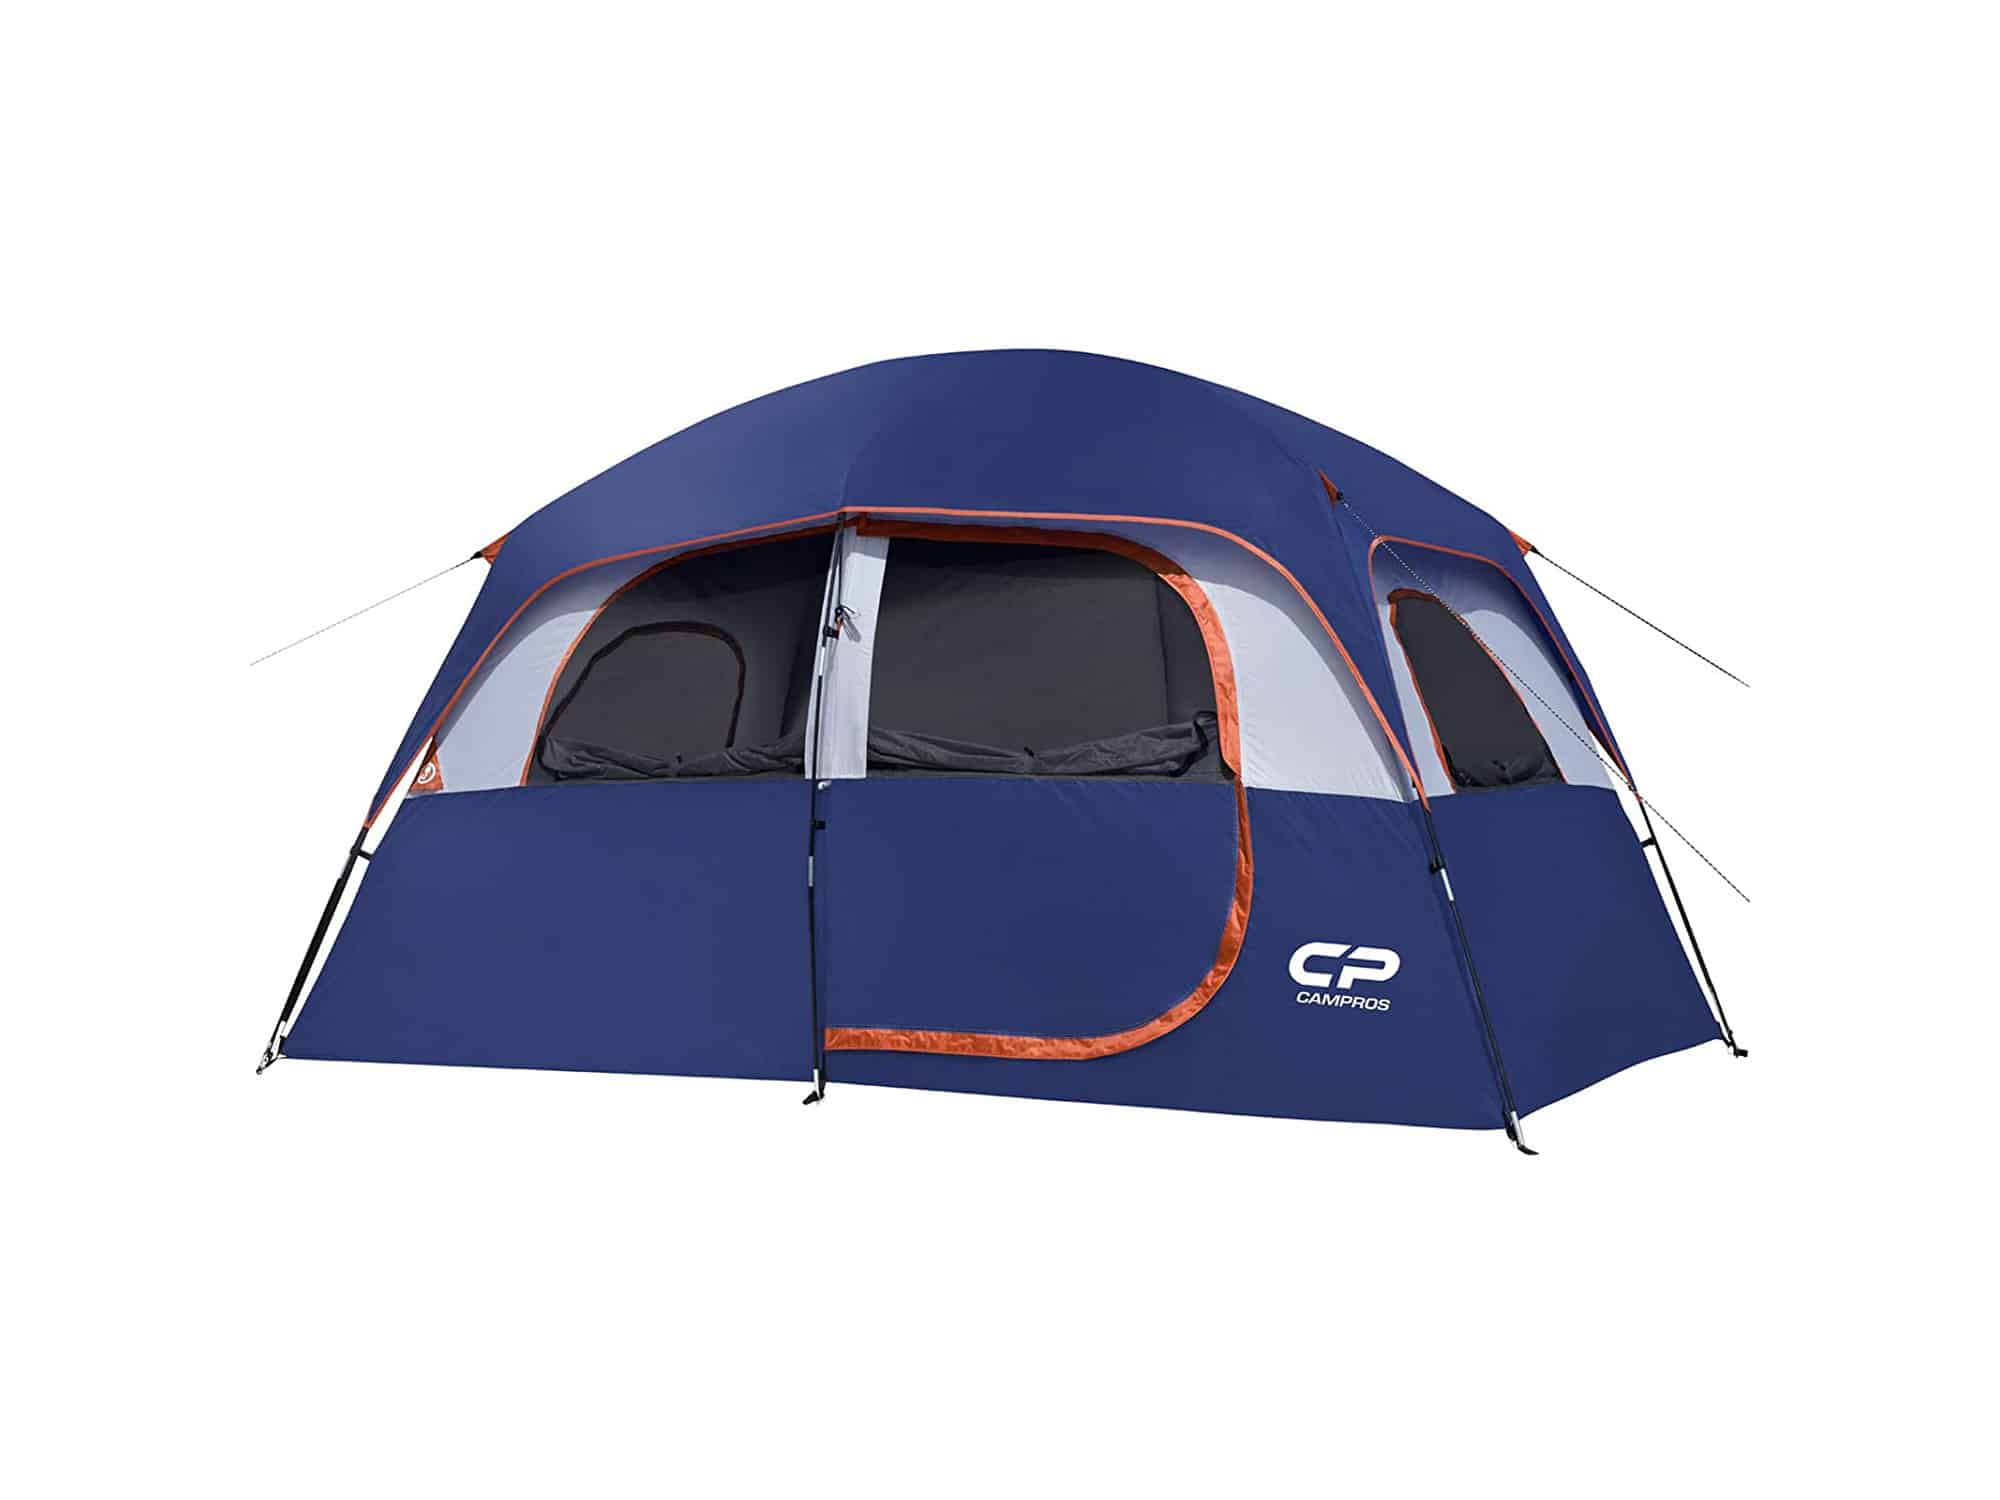 Campros 6-person Camping Tent